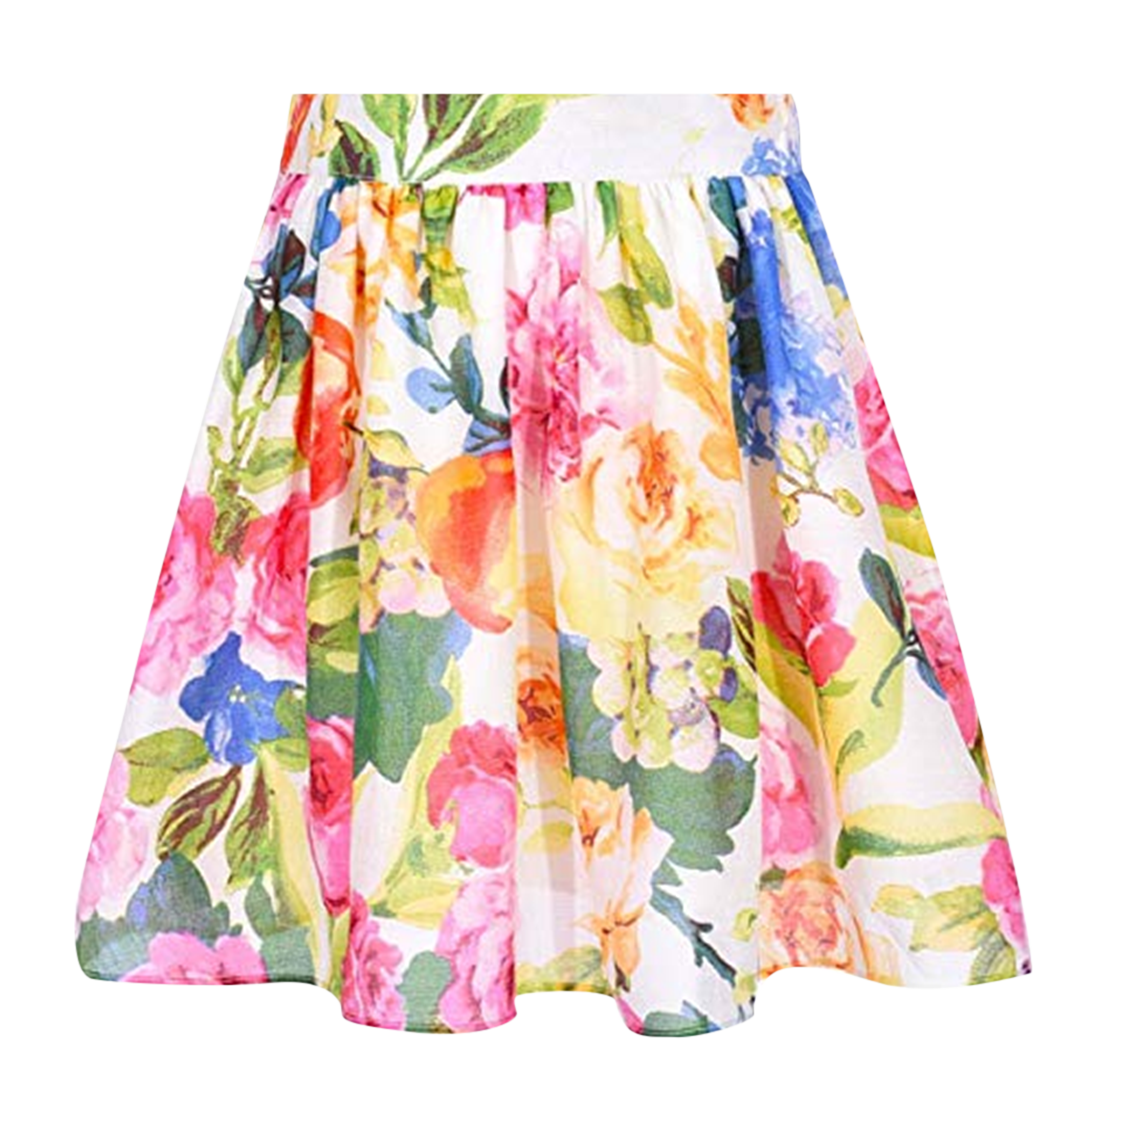 Skirts PNG Images Transparent Background | PNG Play